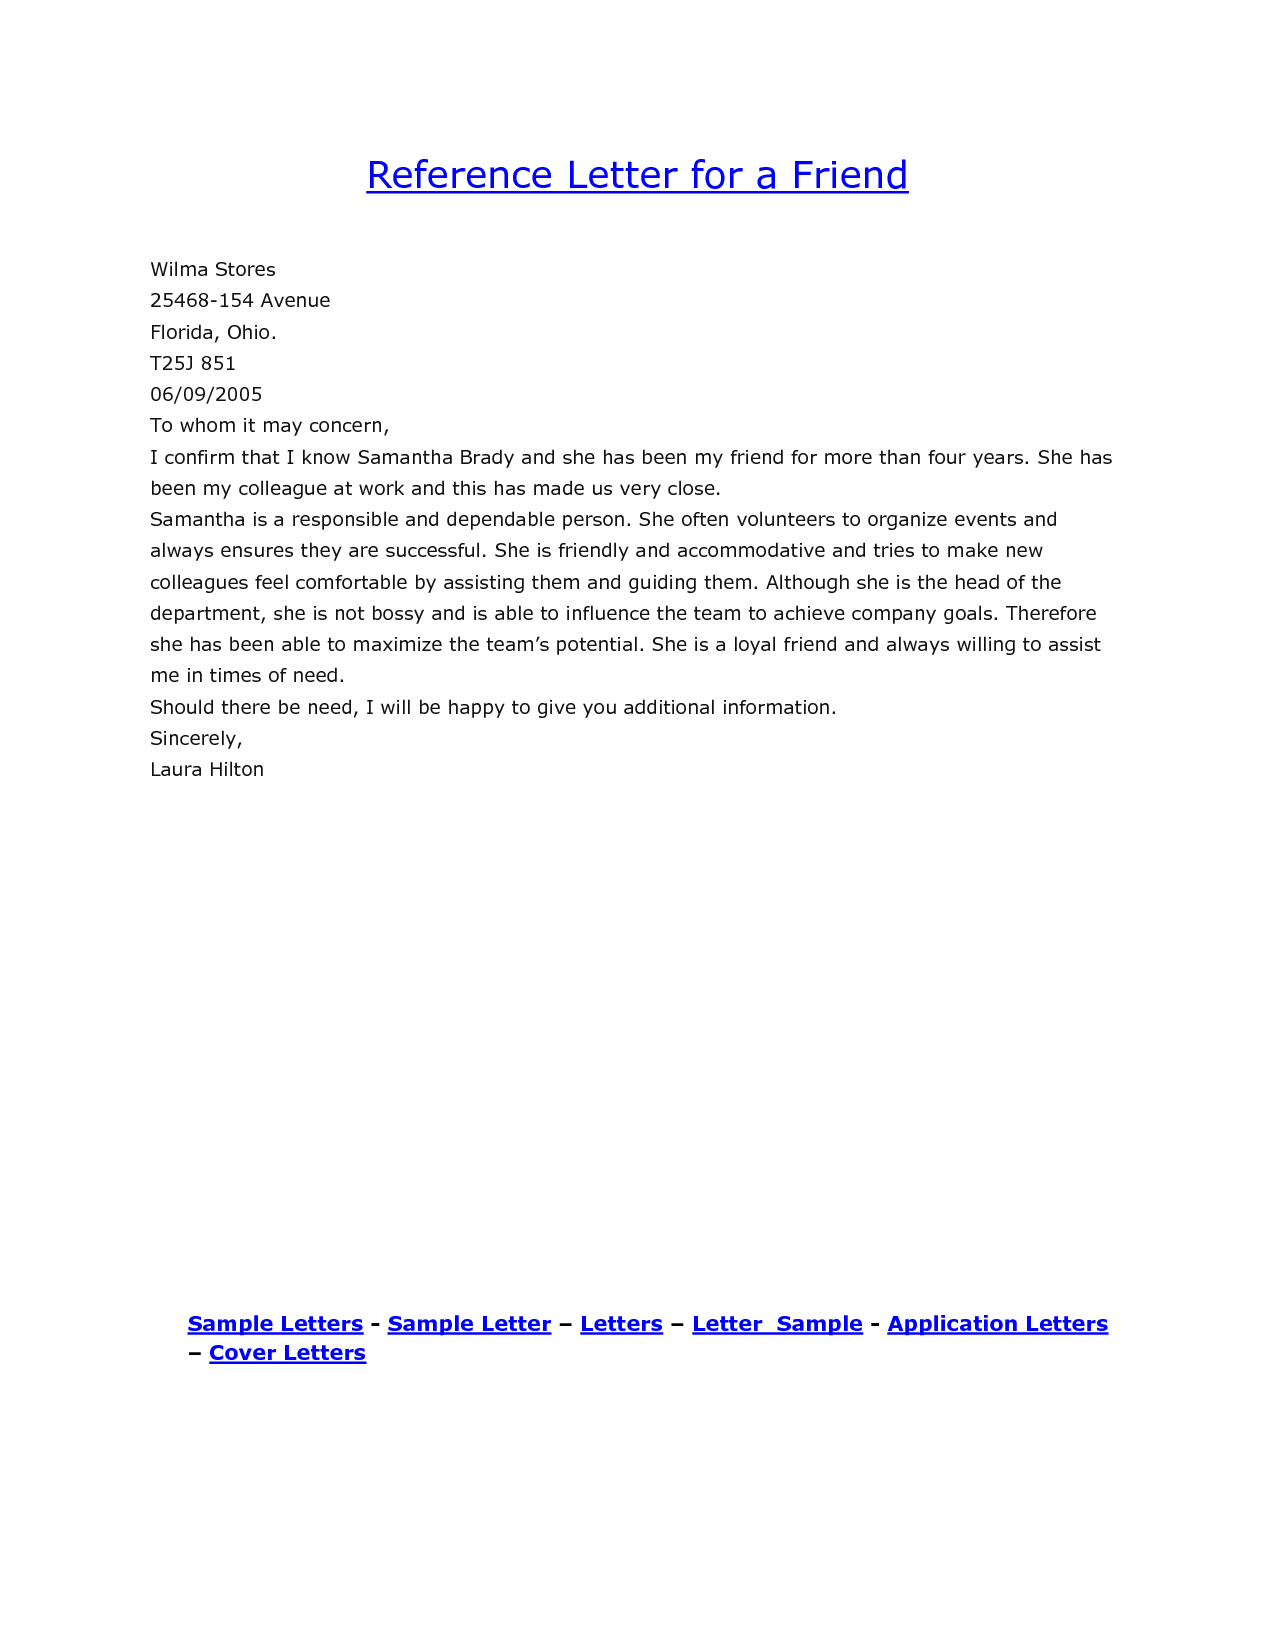 Sample Reference Letter For A Close Friend Cover Letter inside sizing 1275 X 1650